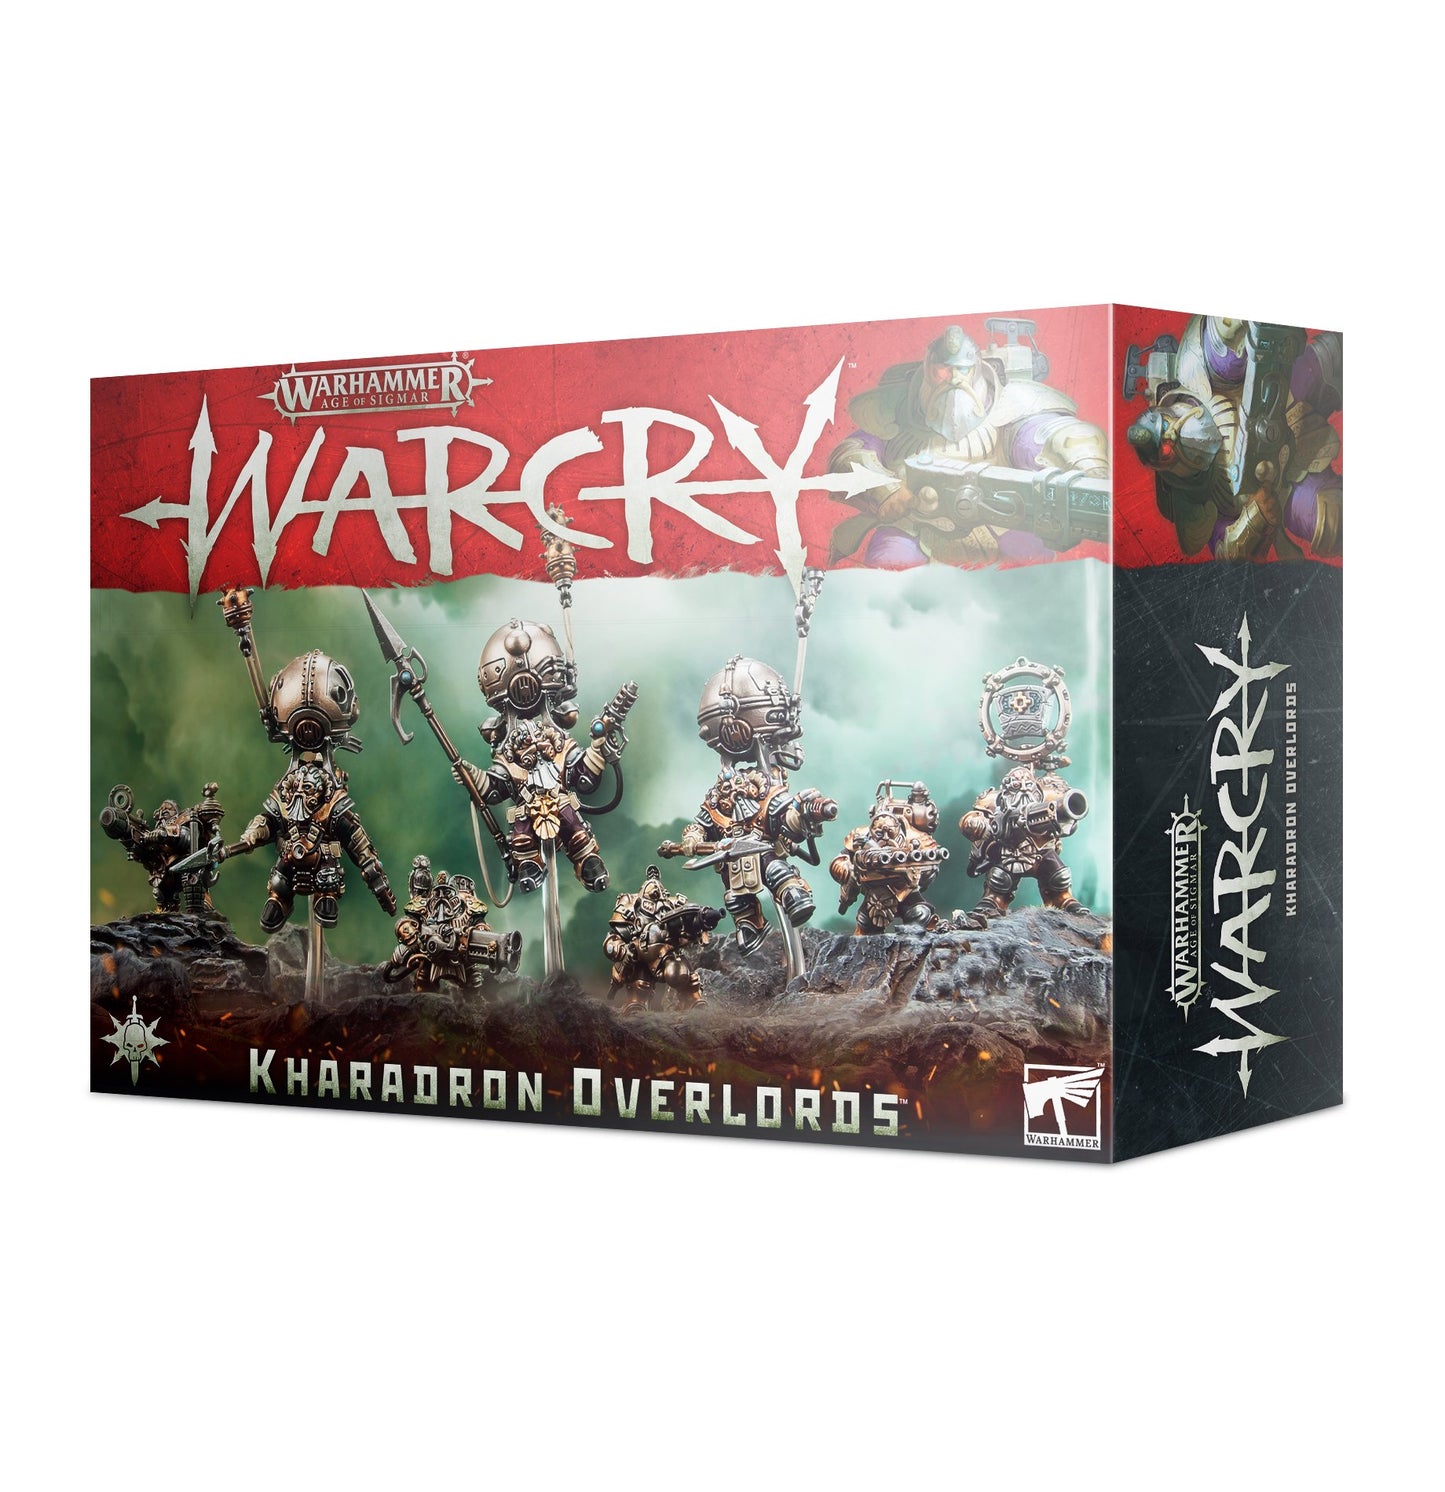 WARHAMMER: WARCRY - KHARADRON OVERLORDS